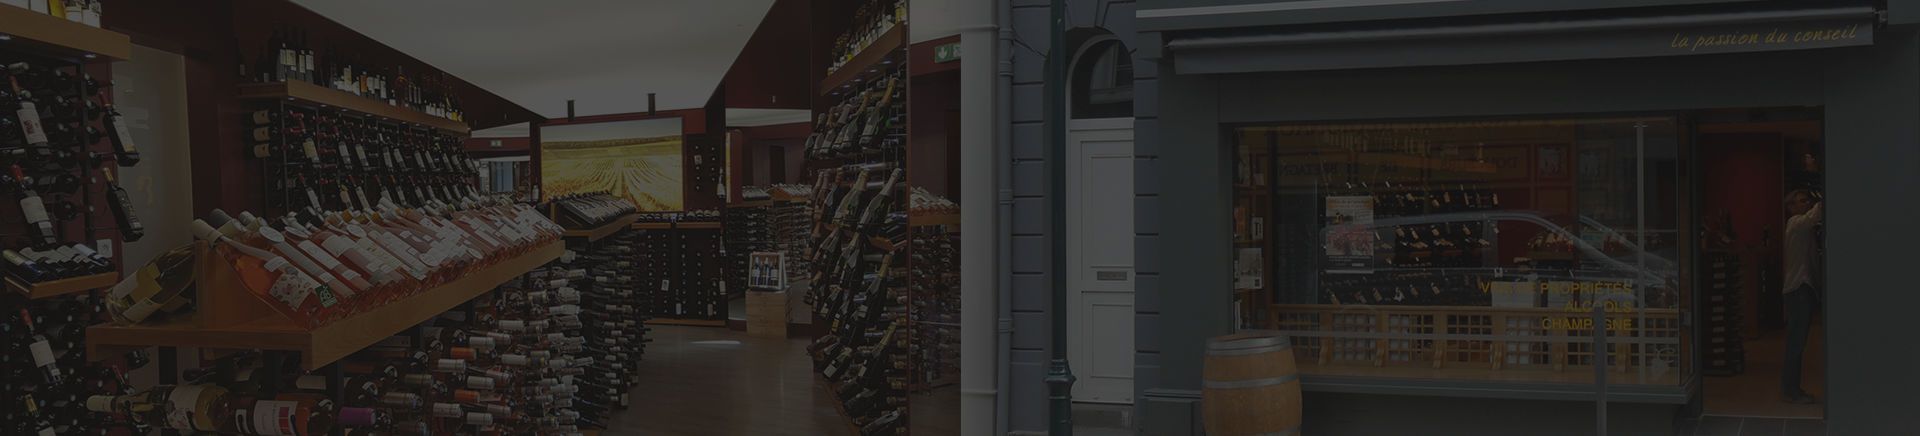 With more than 150 retail stores, CAVAVIN is the leader of wine shops in franchise